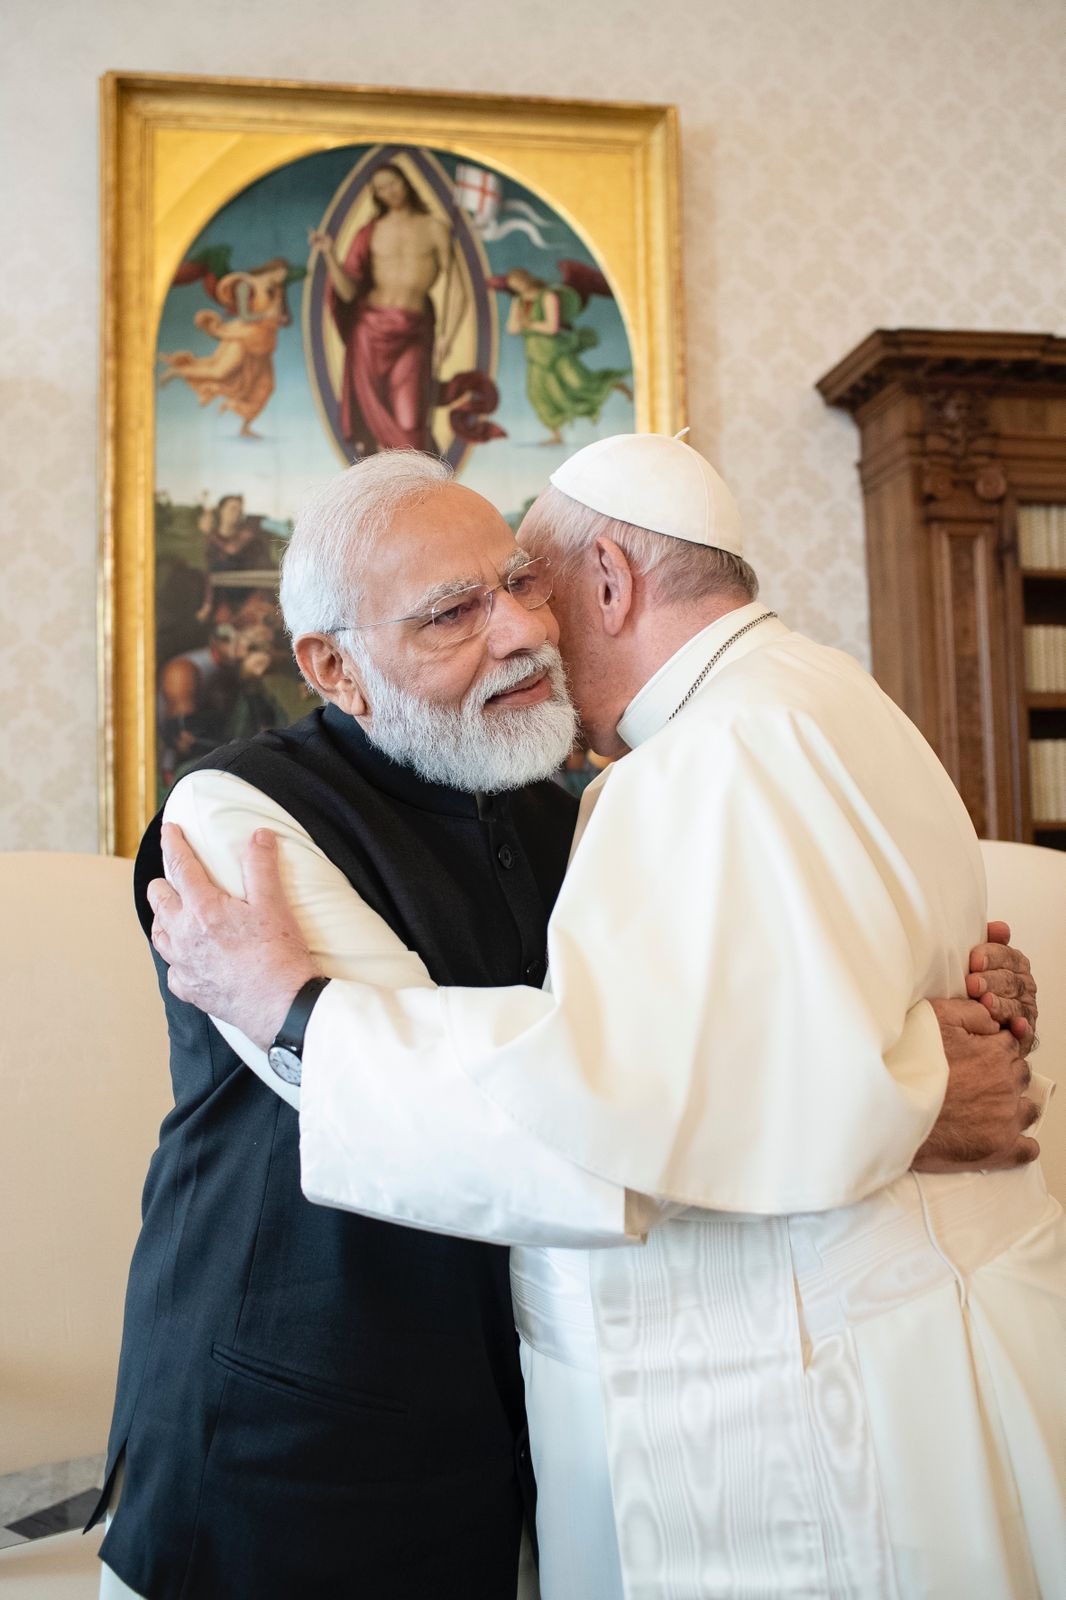 PM Modi to meet Pope Francis in Vatican City